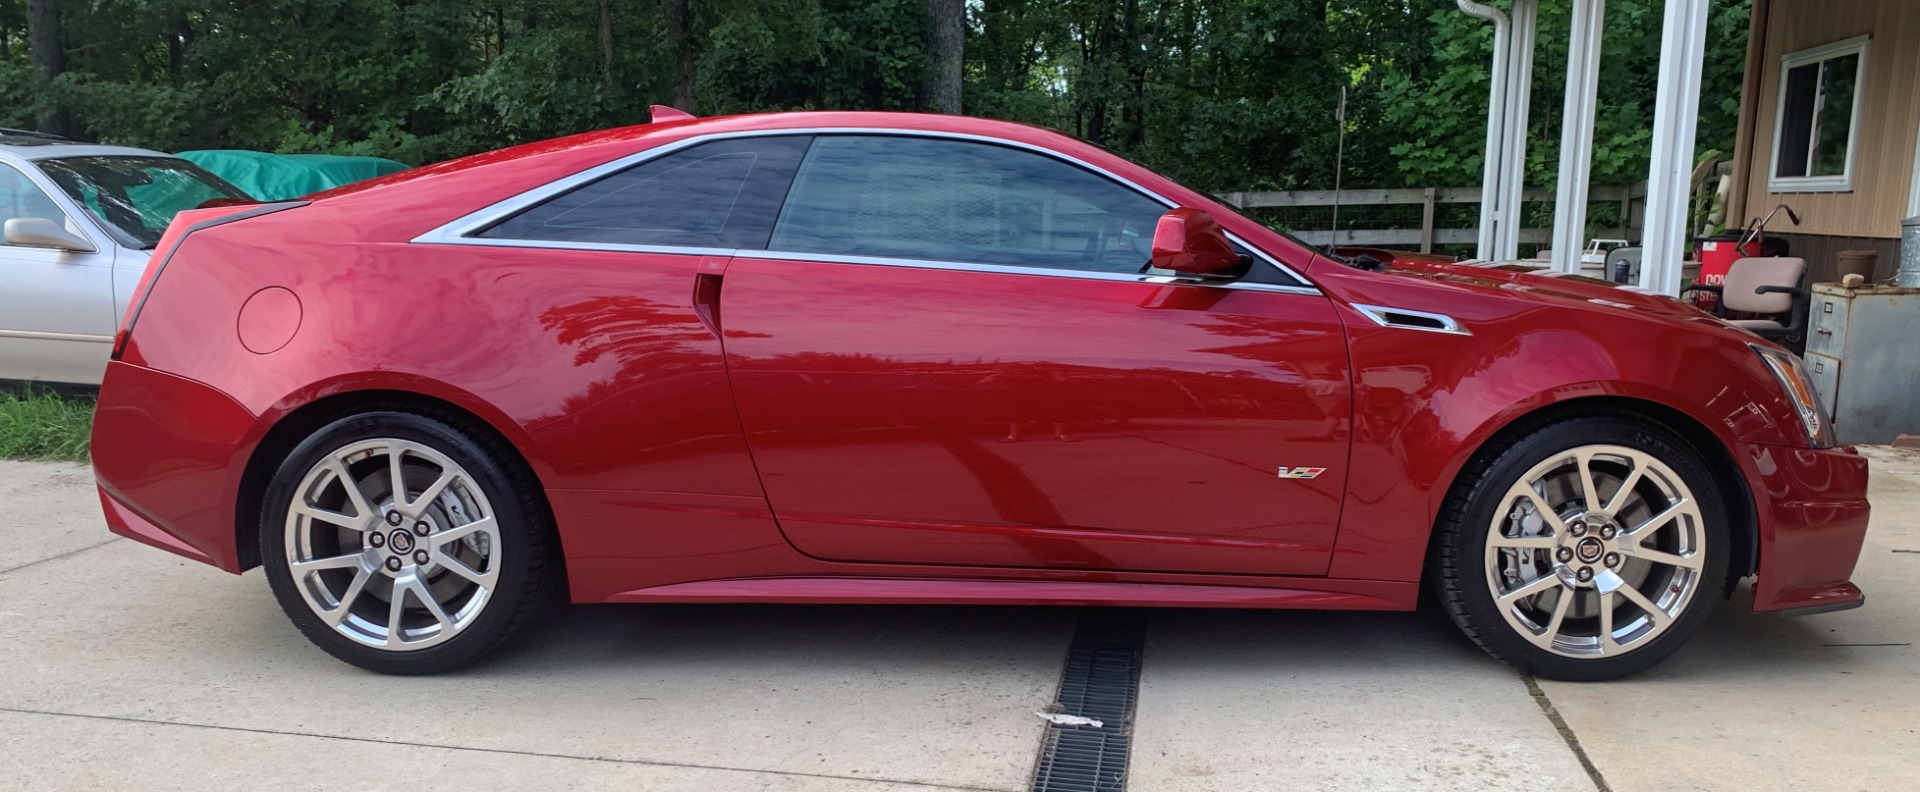 Used 2011 Cadillac CTS-V  215 , For Sale $49700, Call Us: (704) 996-3735